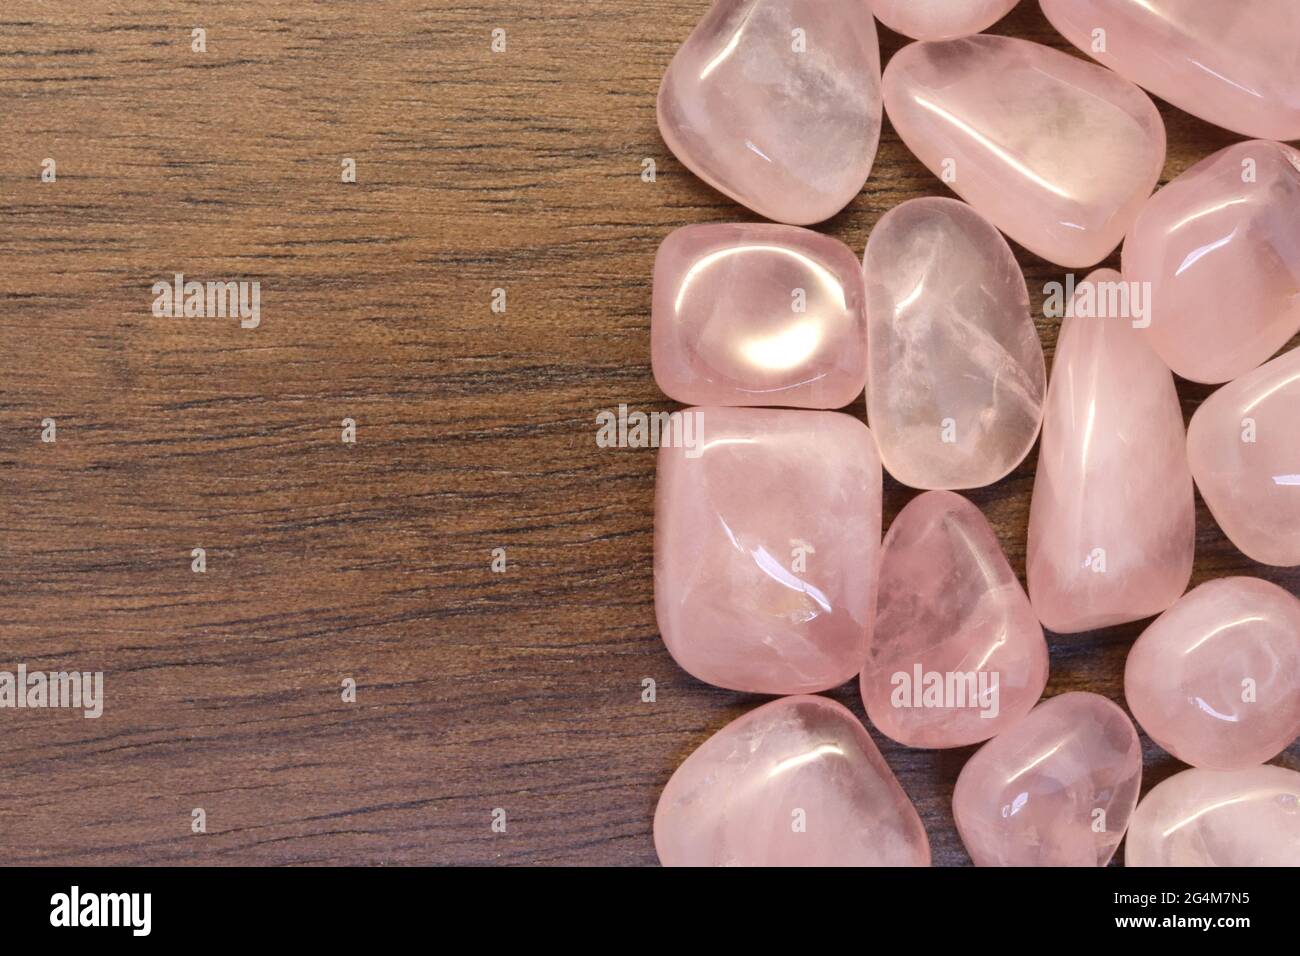 Mineral stone beads connectors for making jewelry Stock Photo - Alamy